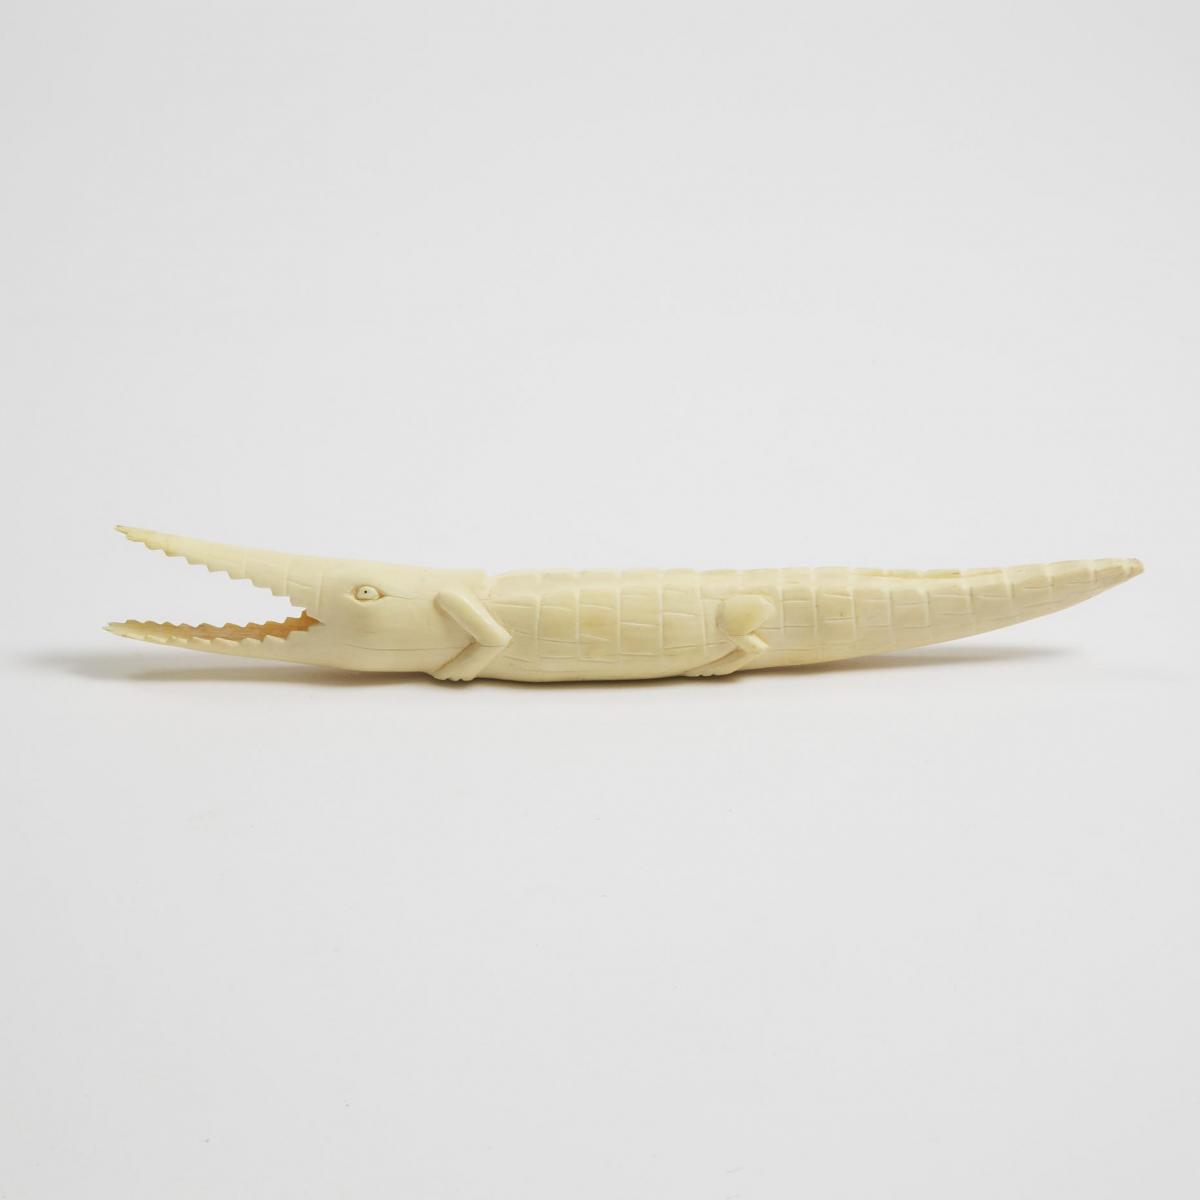 African Carved Ivory Crocodile, mid 20th century, length 12.75 in — 32.4 cm - Image 2 of 2